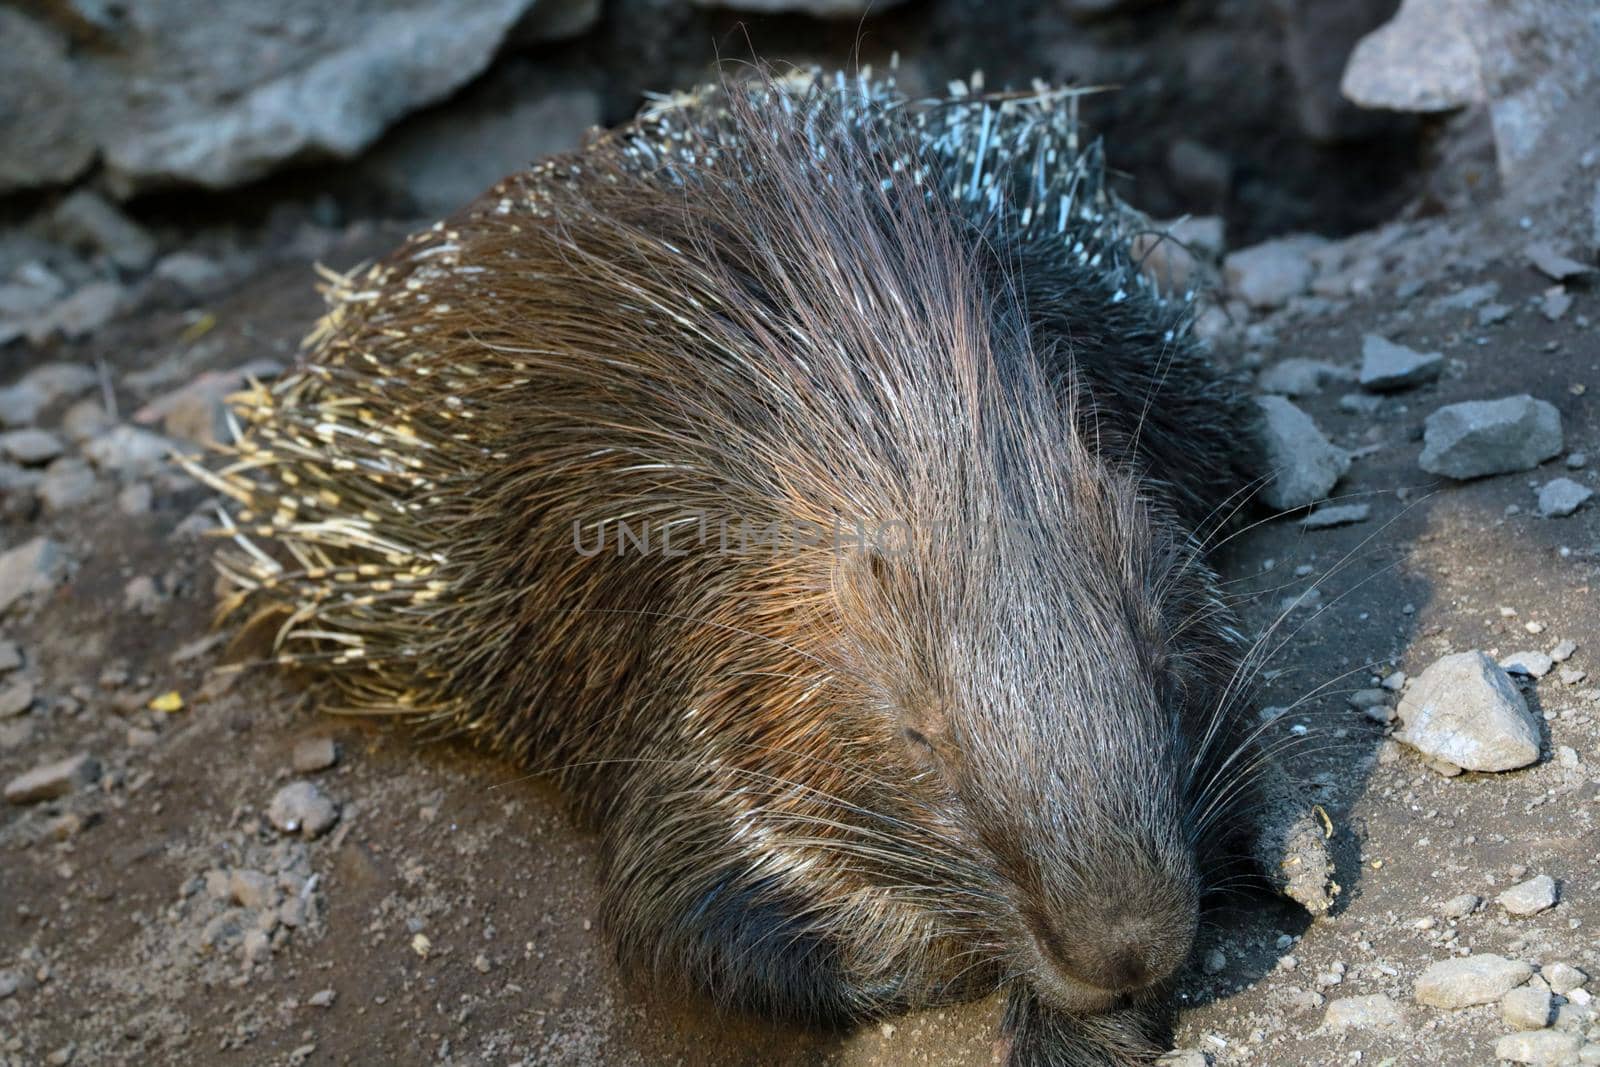 The porcupine lies on the ground and basks in the sun. Porcupines are large rodents with sharp spines or quills that protect them from predators